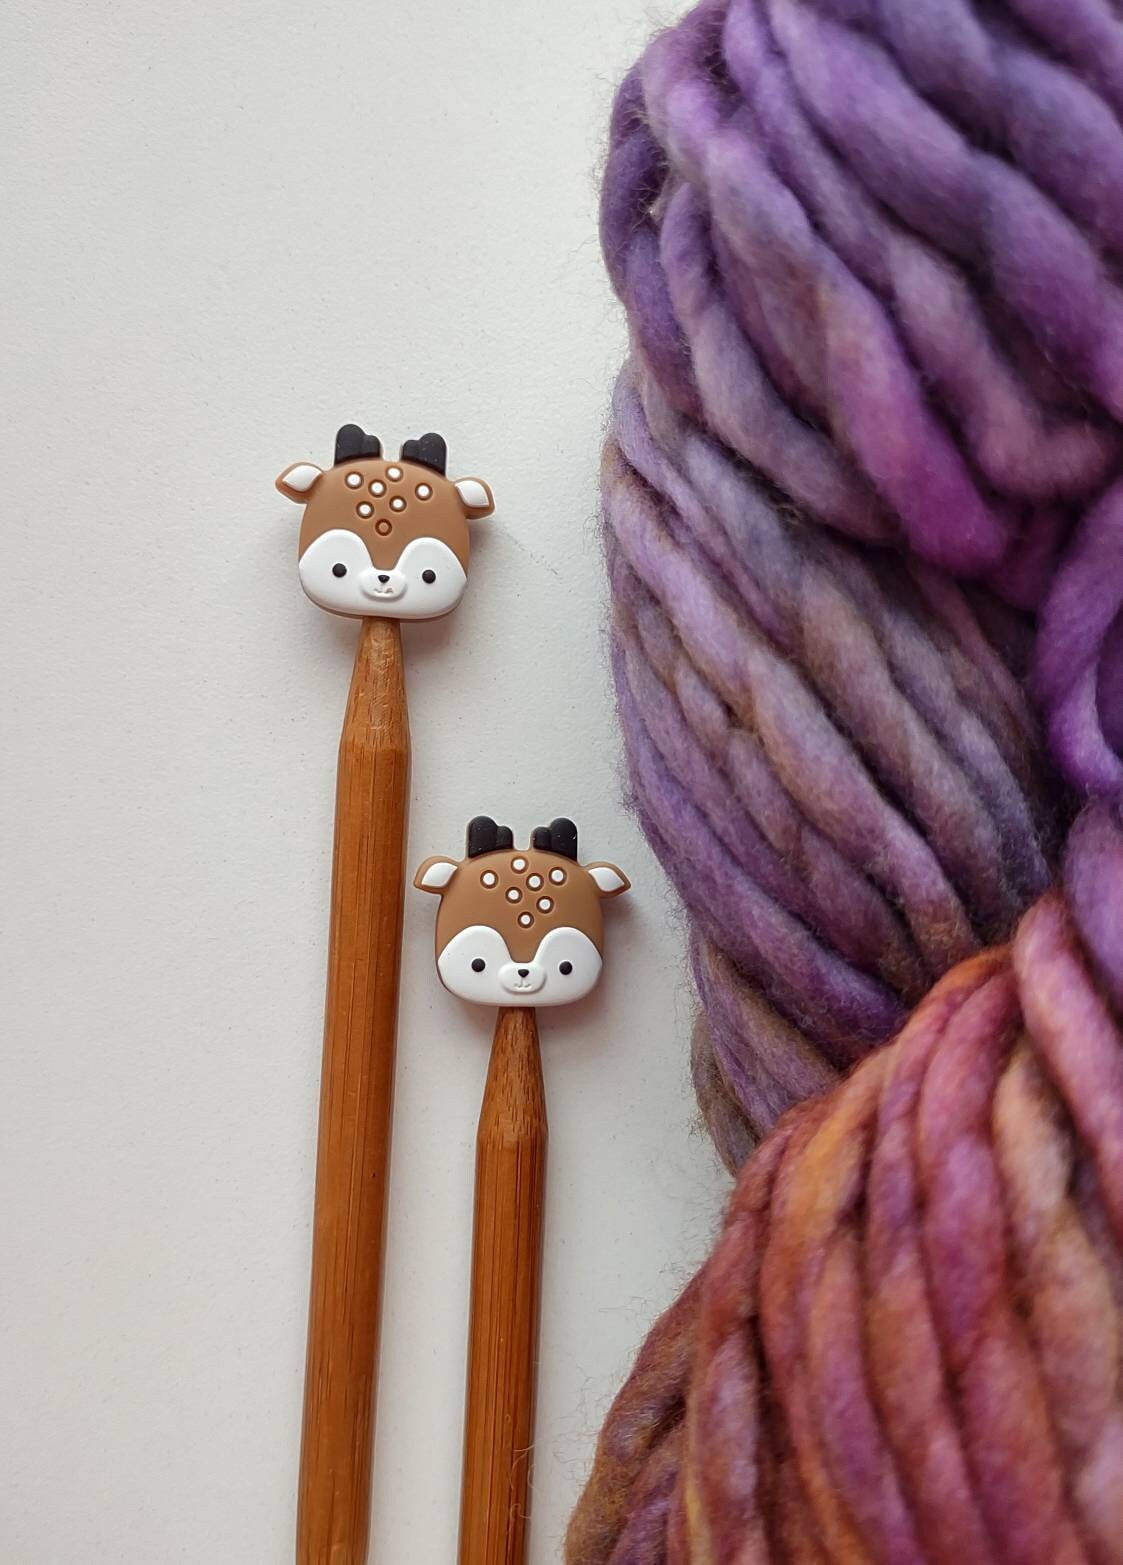 Fawn Knitting Needle Stitch Stoppers. Needle Protectors. Knitting Needle Stoppers. Knitting Notions, Accessories, Supplies, Tools.